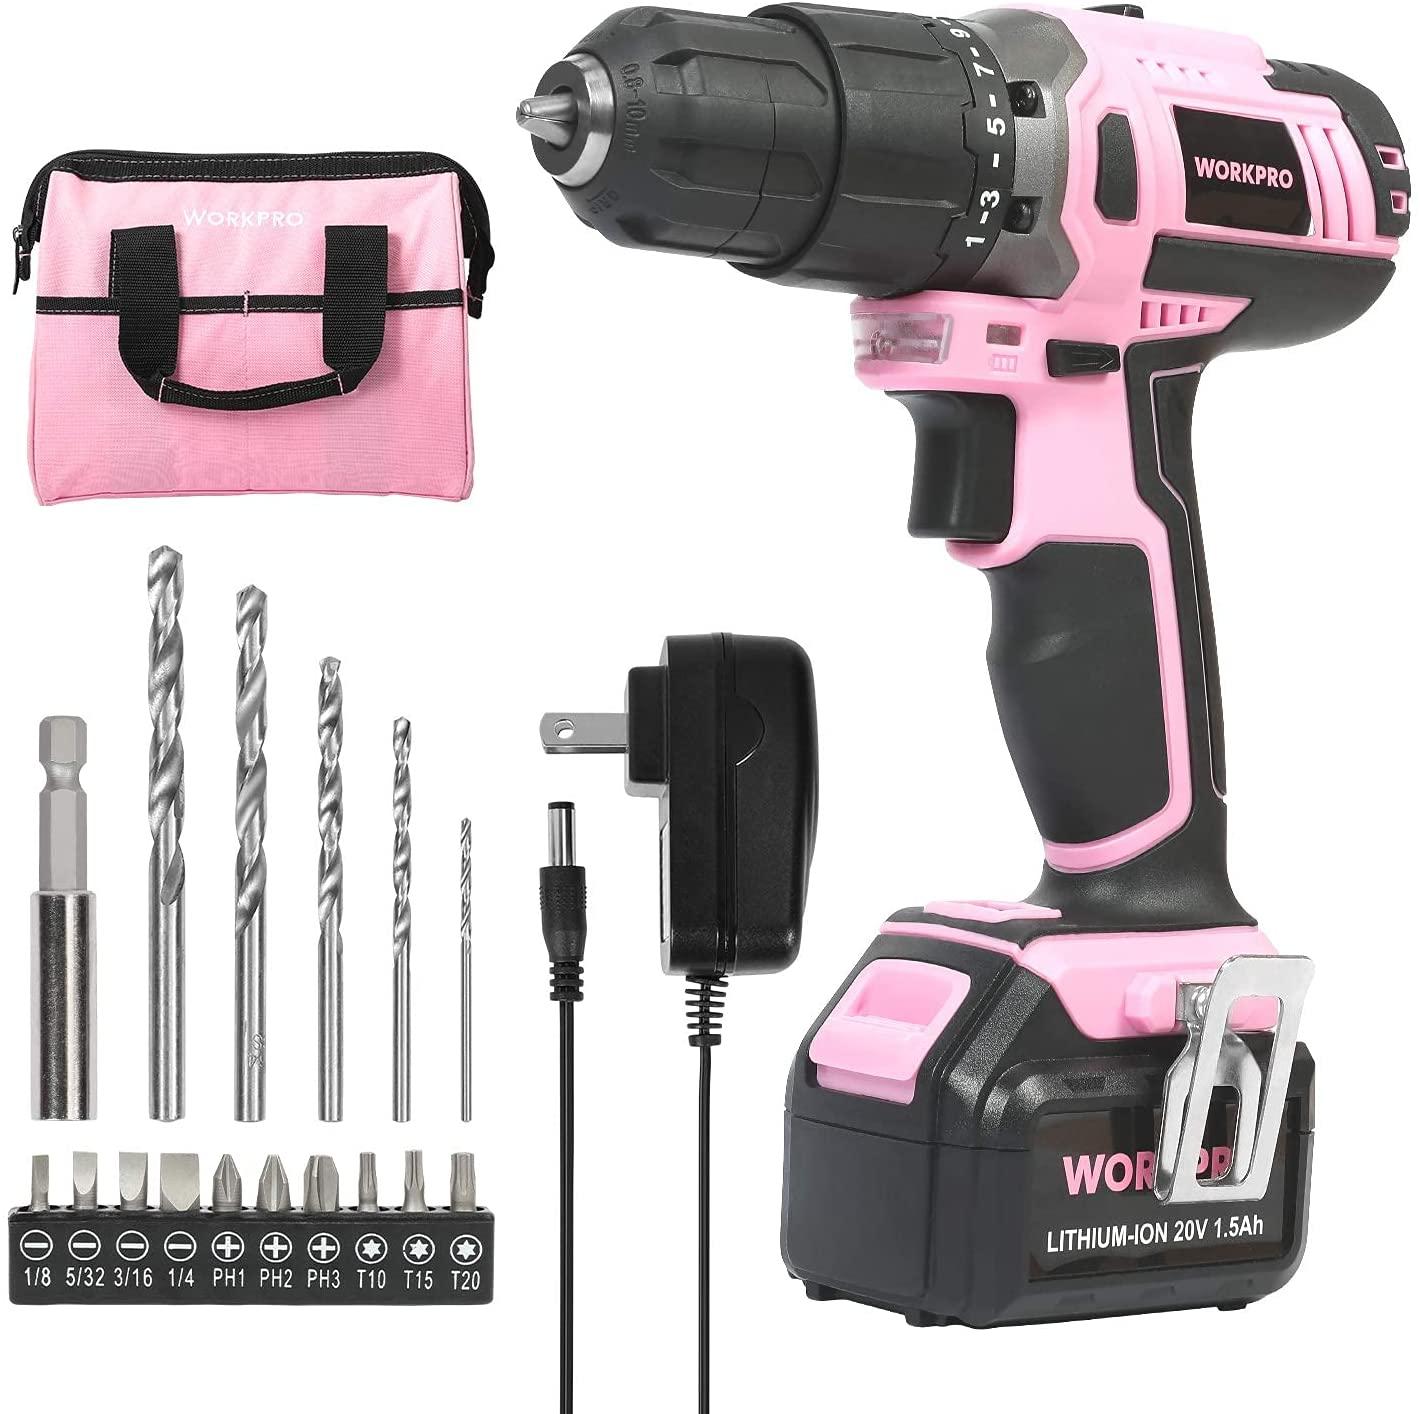 Workpro Pink Cordless 20V Lithium-ion Drill Driver Set for $55.99 Shipped